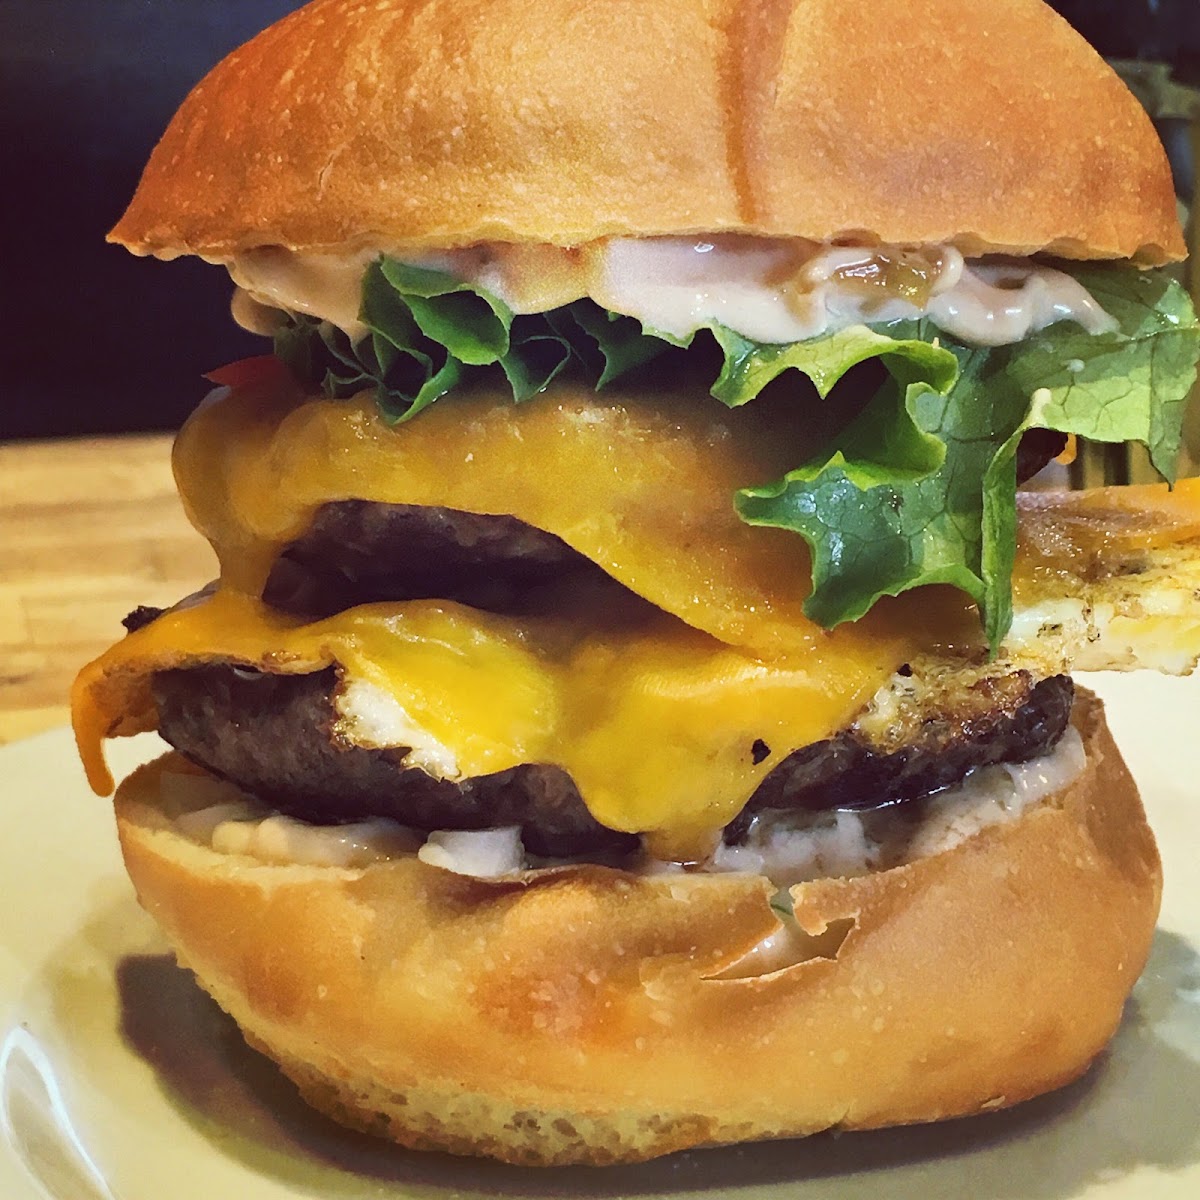 Abe’s Big Lion.
Tower-stacked double beef burger, double cheddar cheese, onions, lettuce, pickles, Abe's sauce, Photo with a gluten free bun.